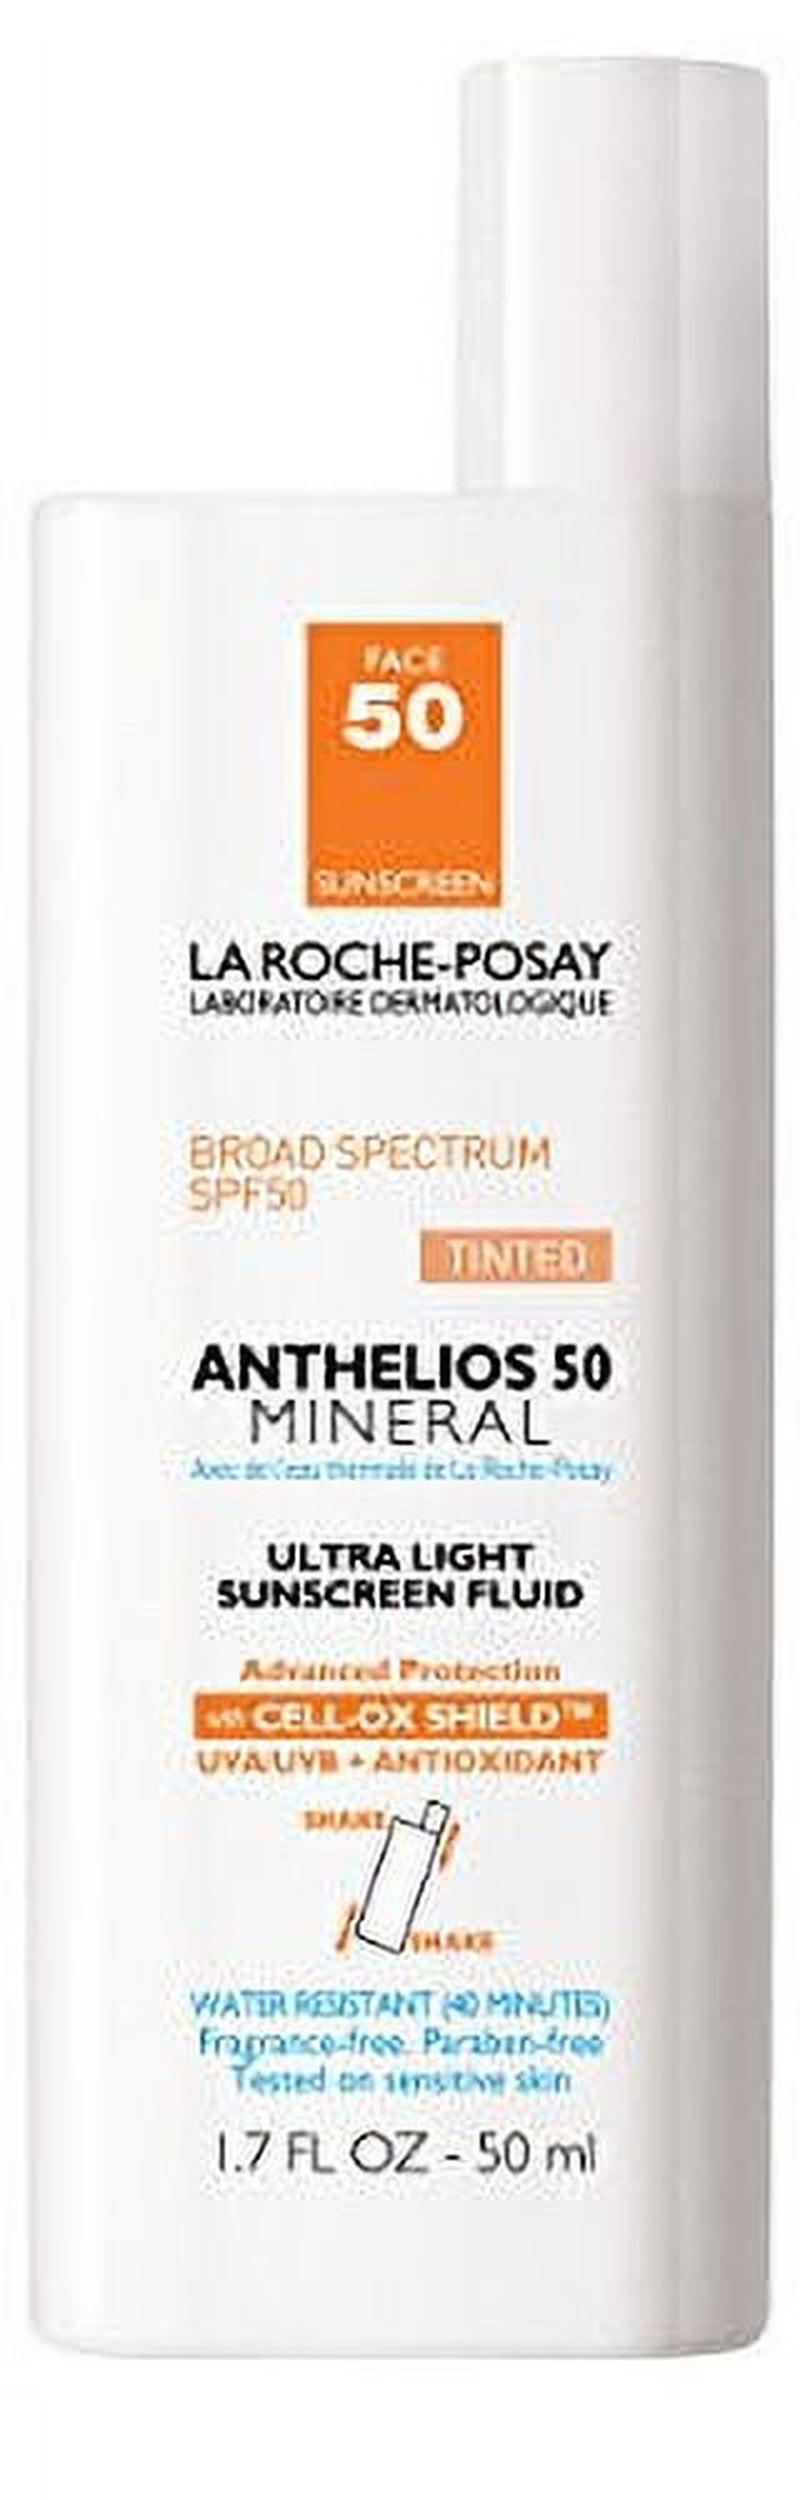 La Roche-Posay Anthelios Mineral Tinted Sunscreen Broad Spectrum SPF 50